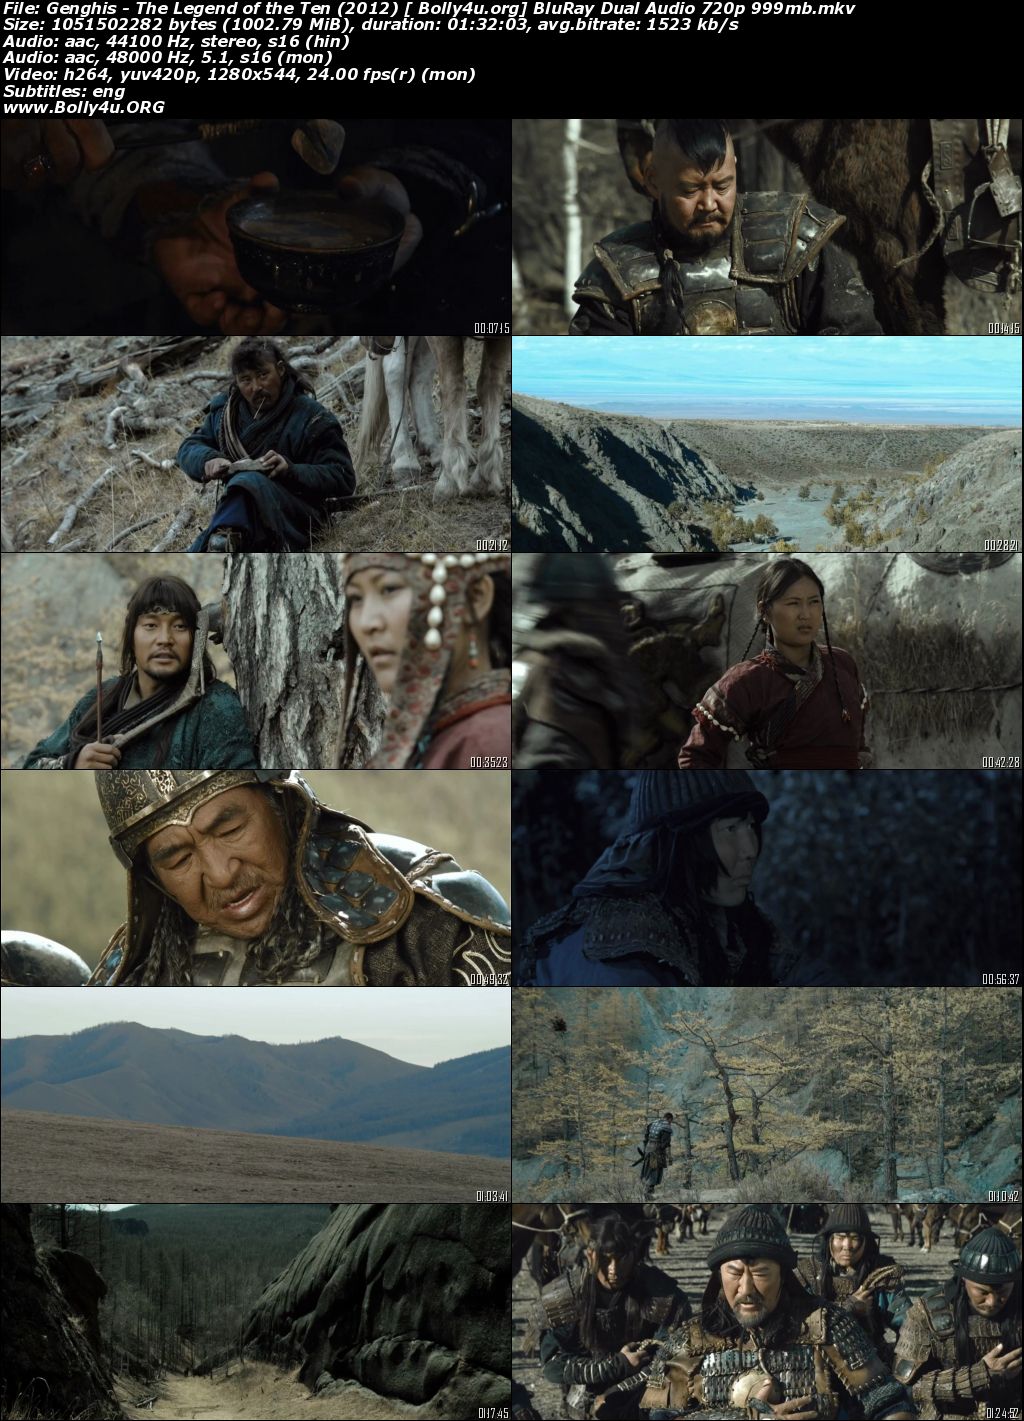 Genghis The Legend of the Ten 2012 BluRay 999MB Hindi Dual Audio 720p Download